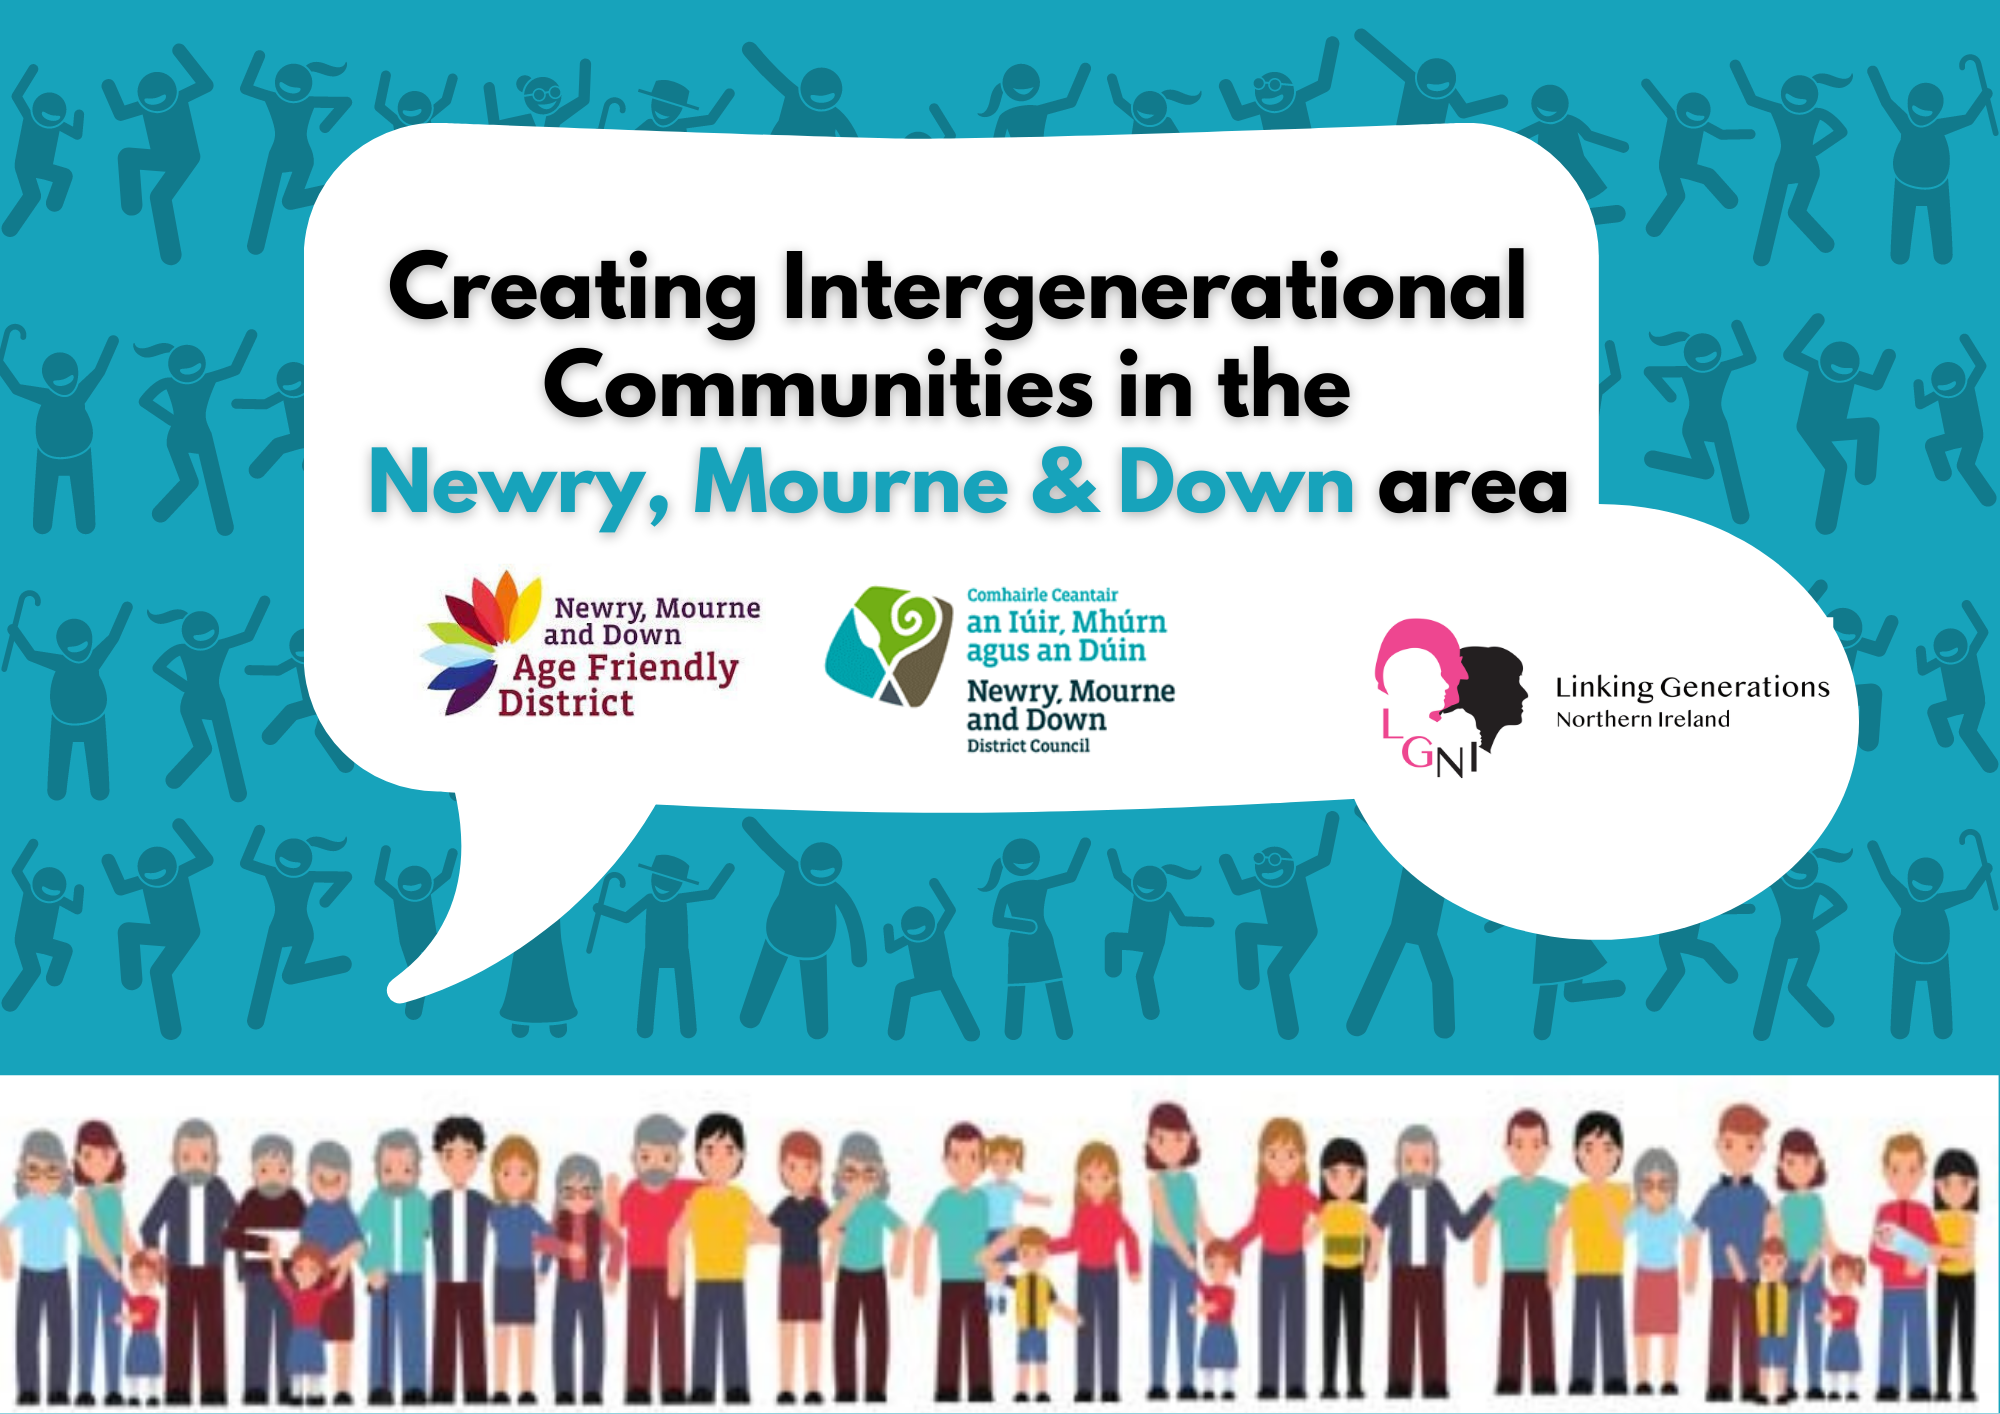 LGNI Newry, Mourne & Down Network meeting